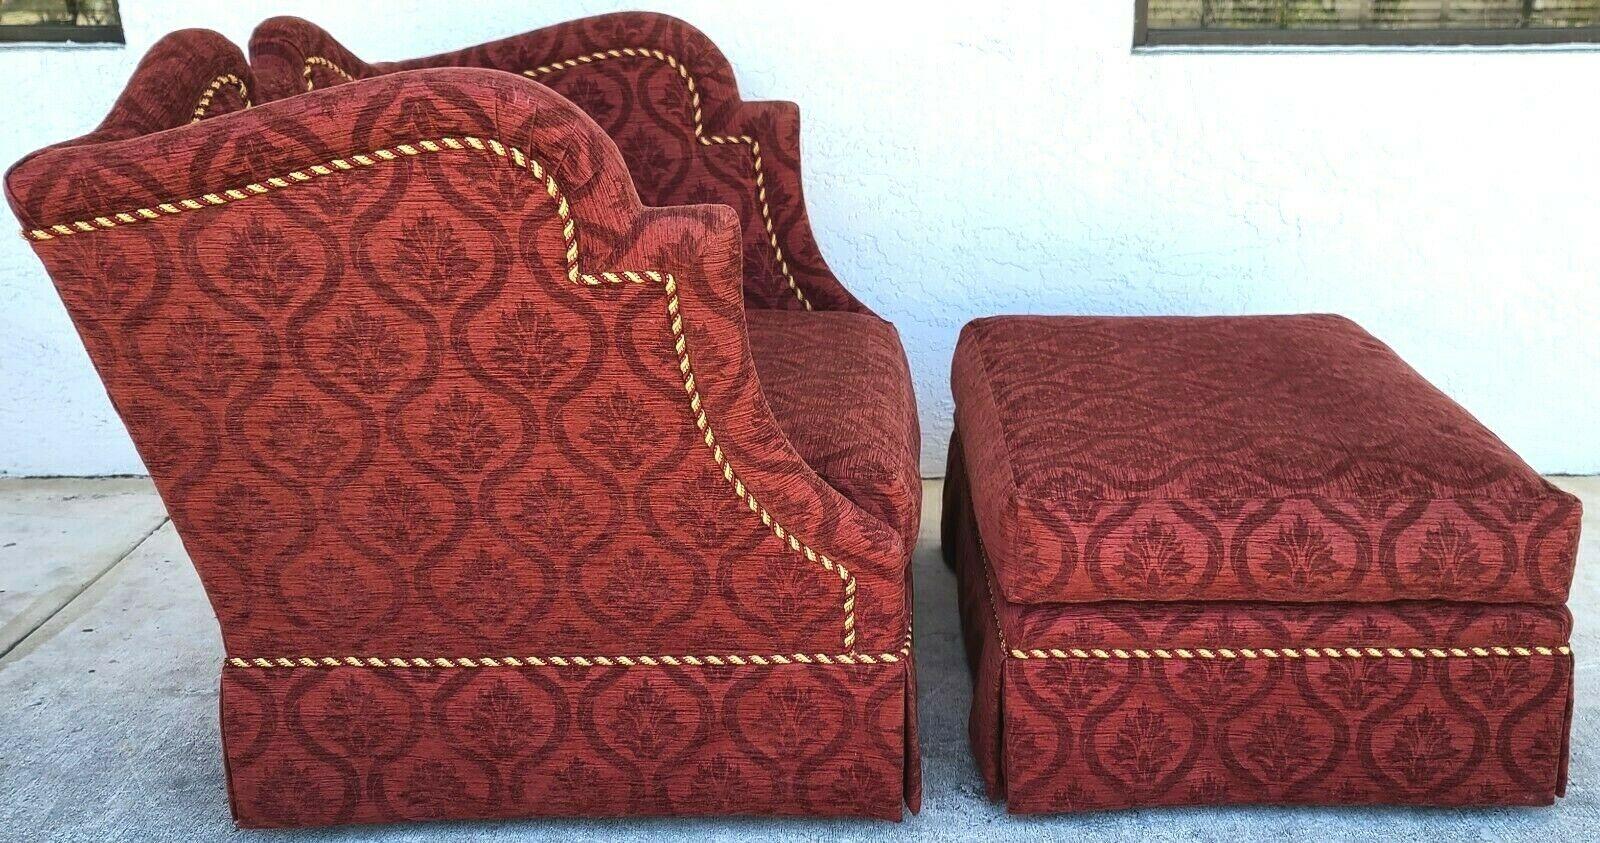 Offering one of our recent Palm Beach estate fine furniture acquisitions of an
oversized Marge Carson wingback chair with rolling ottoman.
And coordinated braided piping/trim.

Approximate measurements in inches
Chair:
38.5